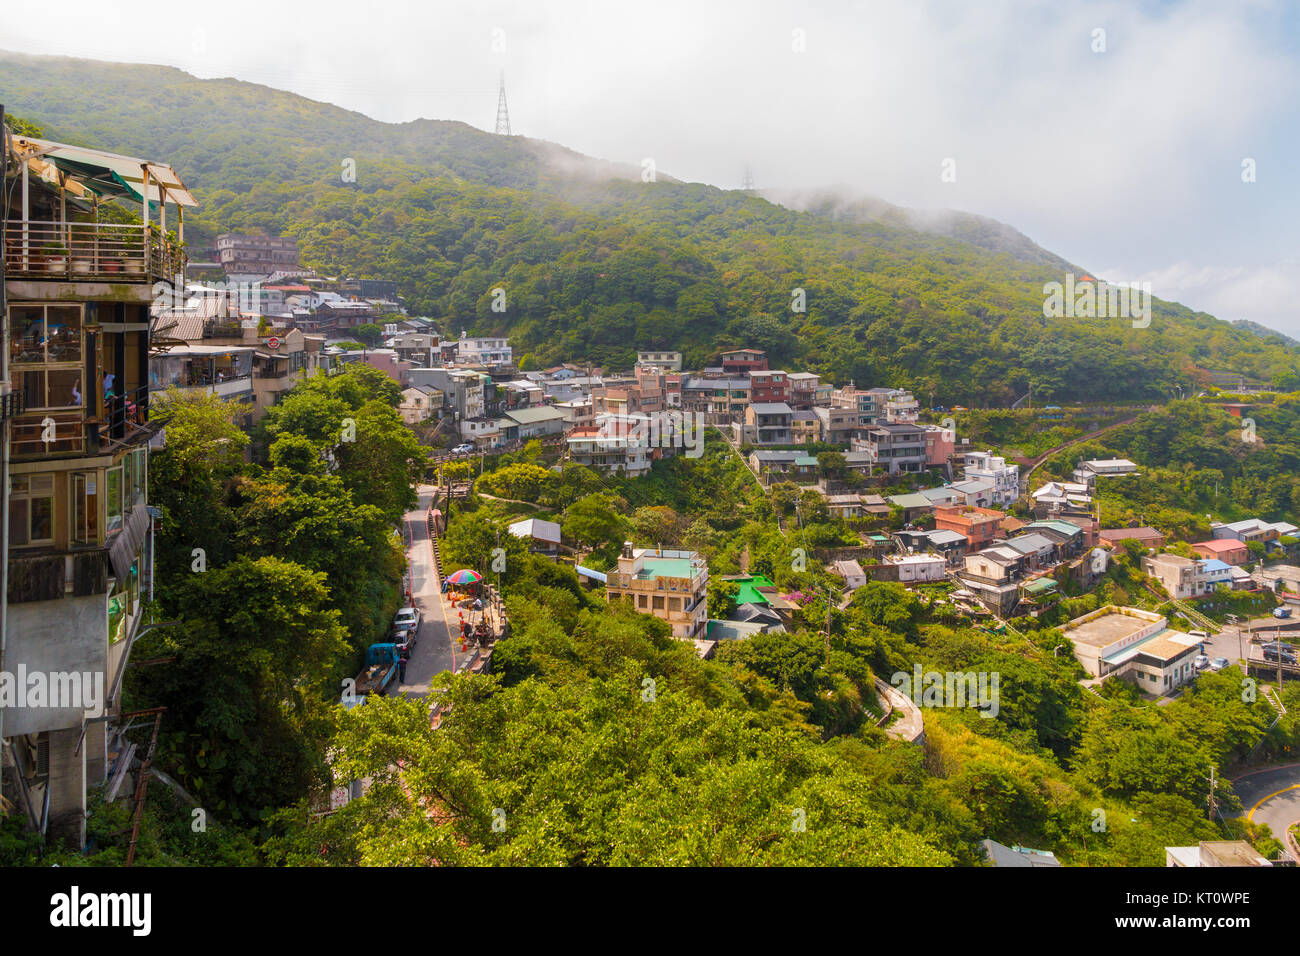 View of Jiufen or Jioufen, a small town  in the Ruifang District, New Taipei, Taiwan. It served as inspiration for the anime movie 'Spirited Away'. Stock Photo